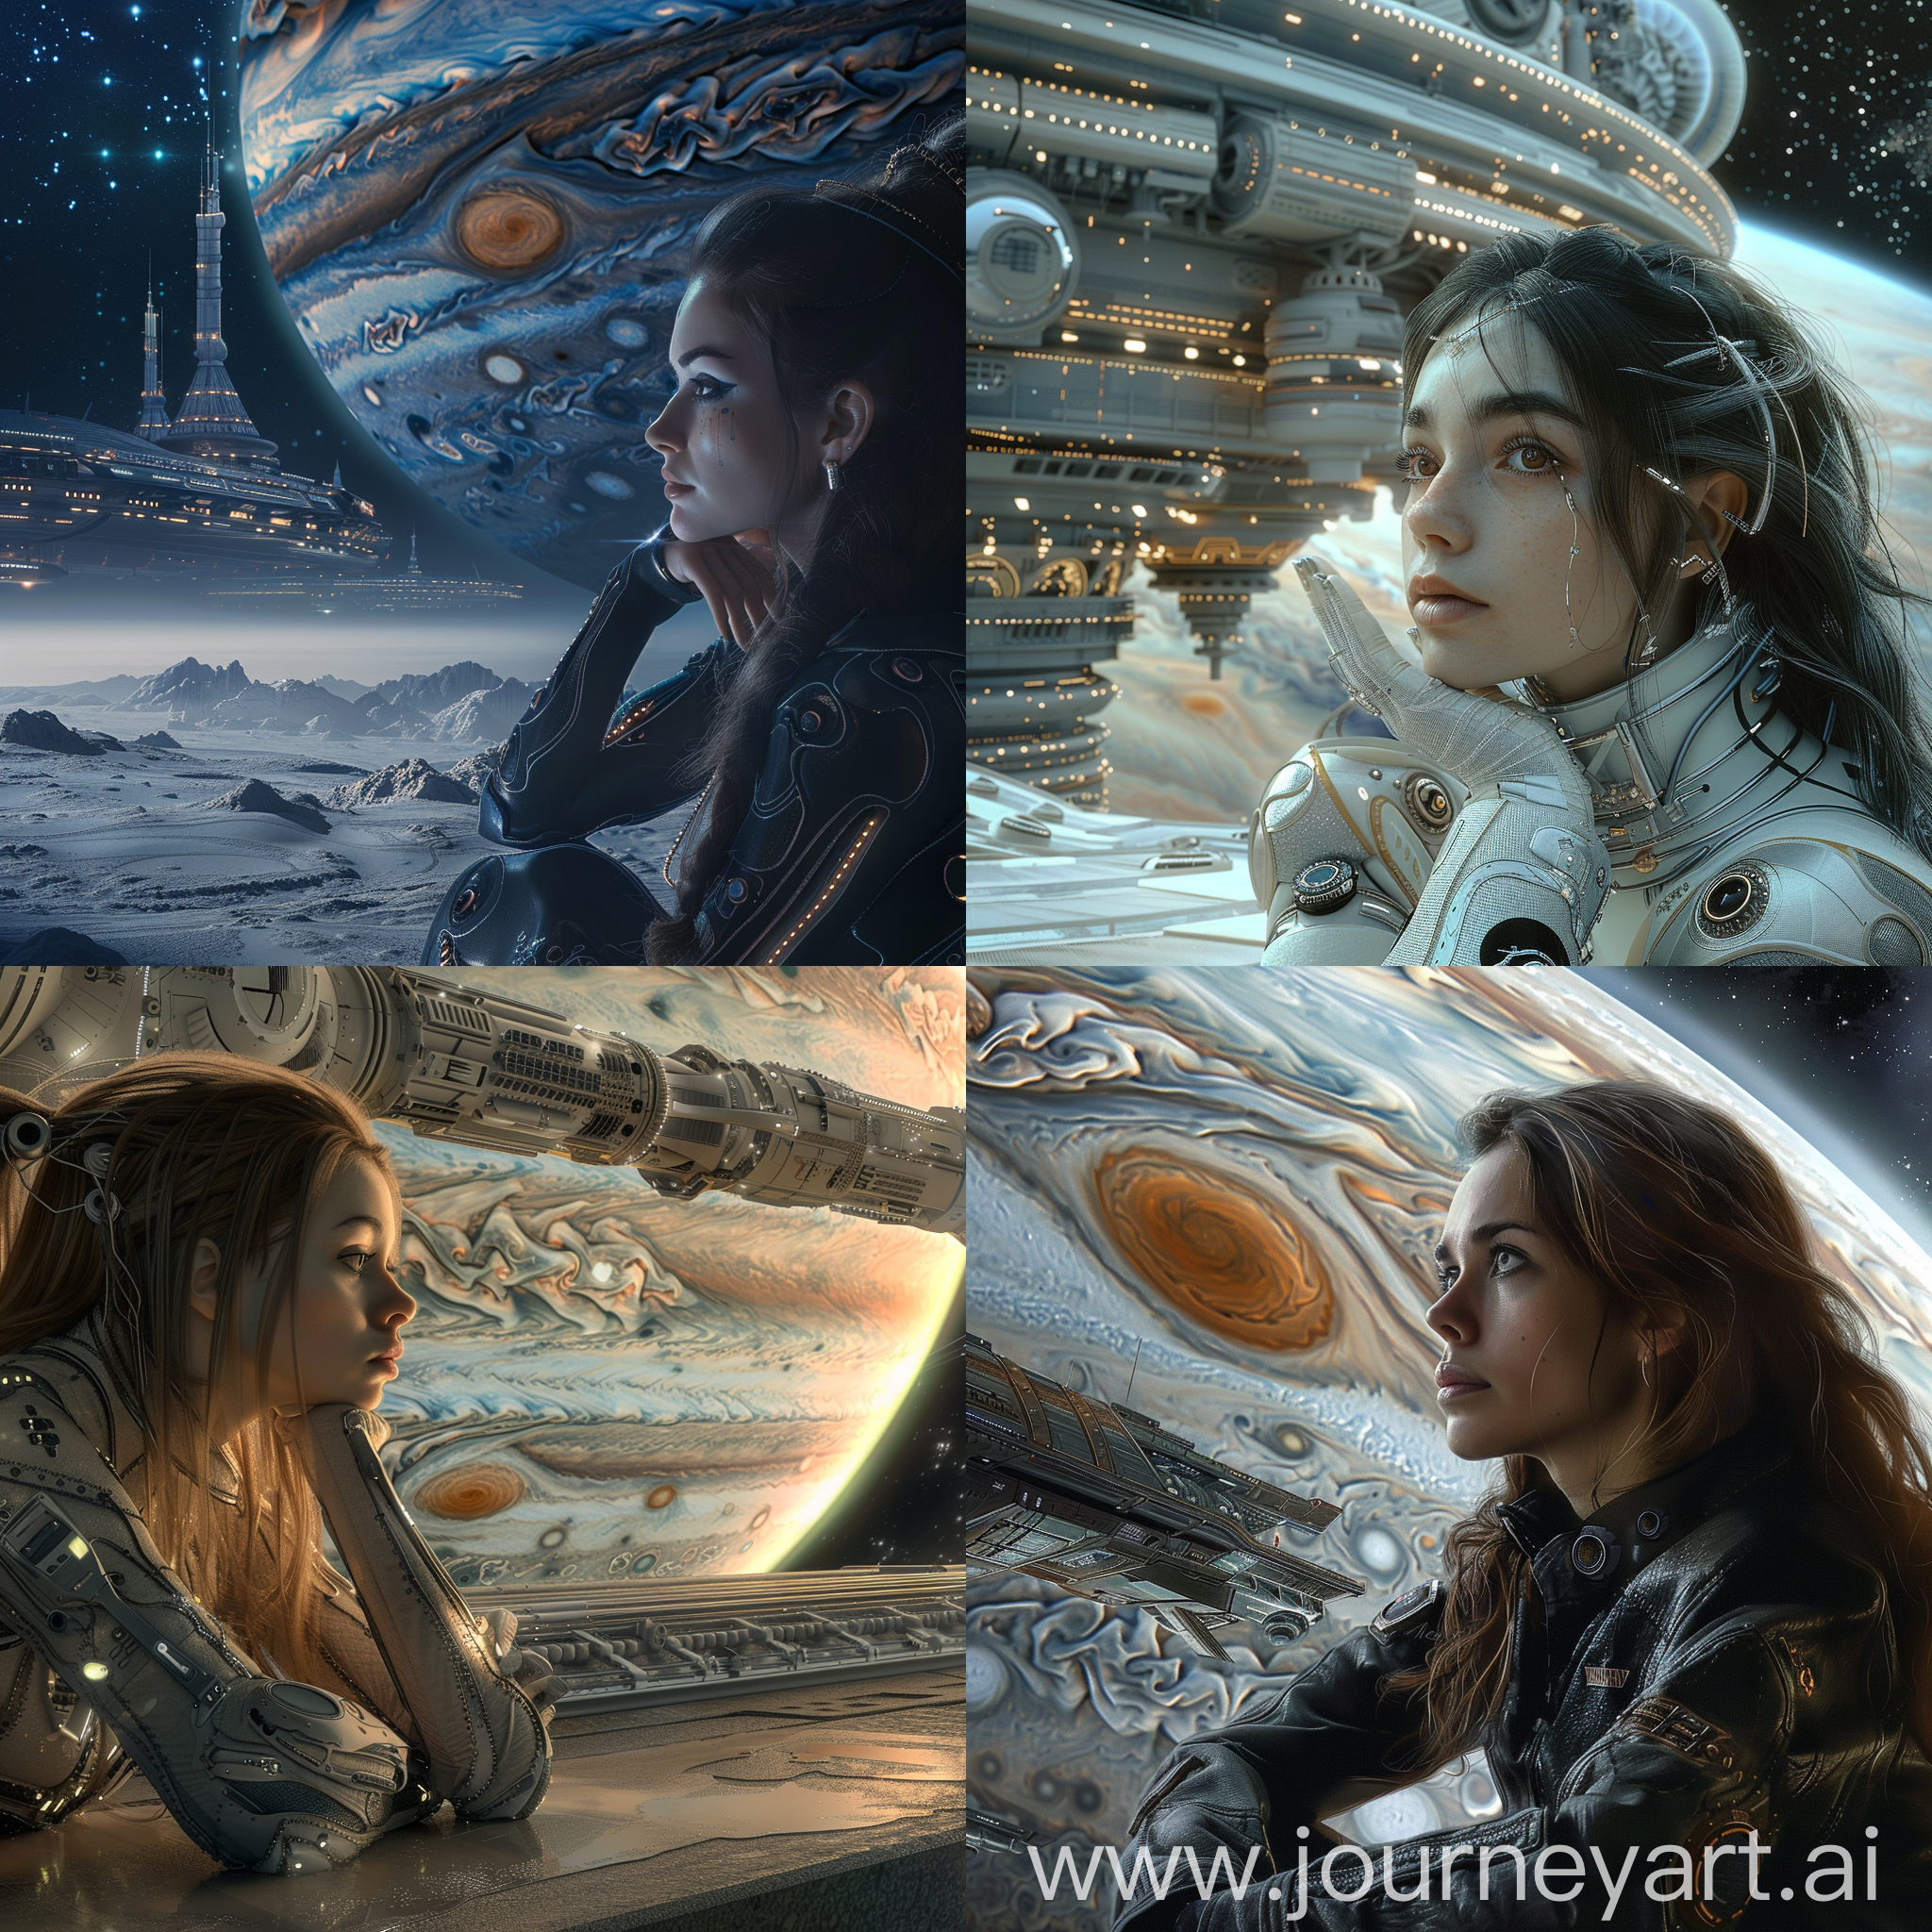 A highly detailed image of an otherworldly futuristic beautiful space woman with beautiful eyes living on one of the moons of Jupiter. She is sitting Infront of a futuristic space station. Beautiful magical mysterious fantasy surreal highly detailed 